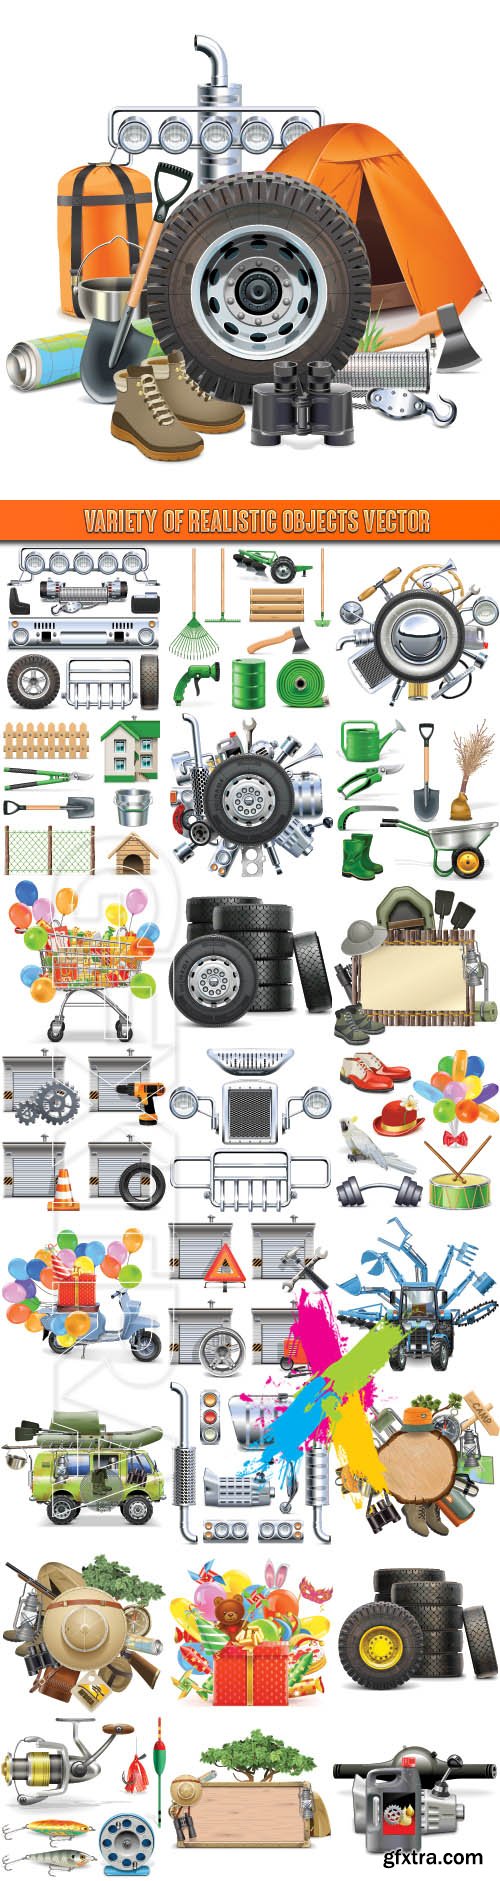 Variety of realistic objects vector